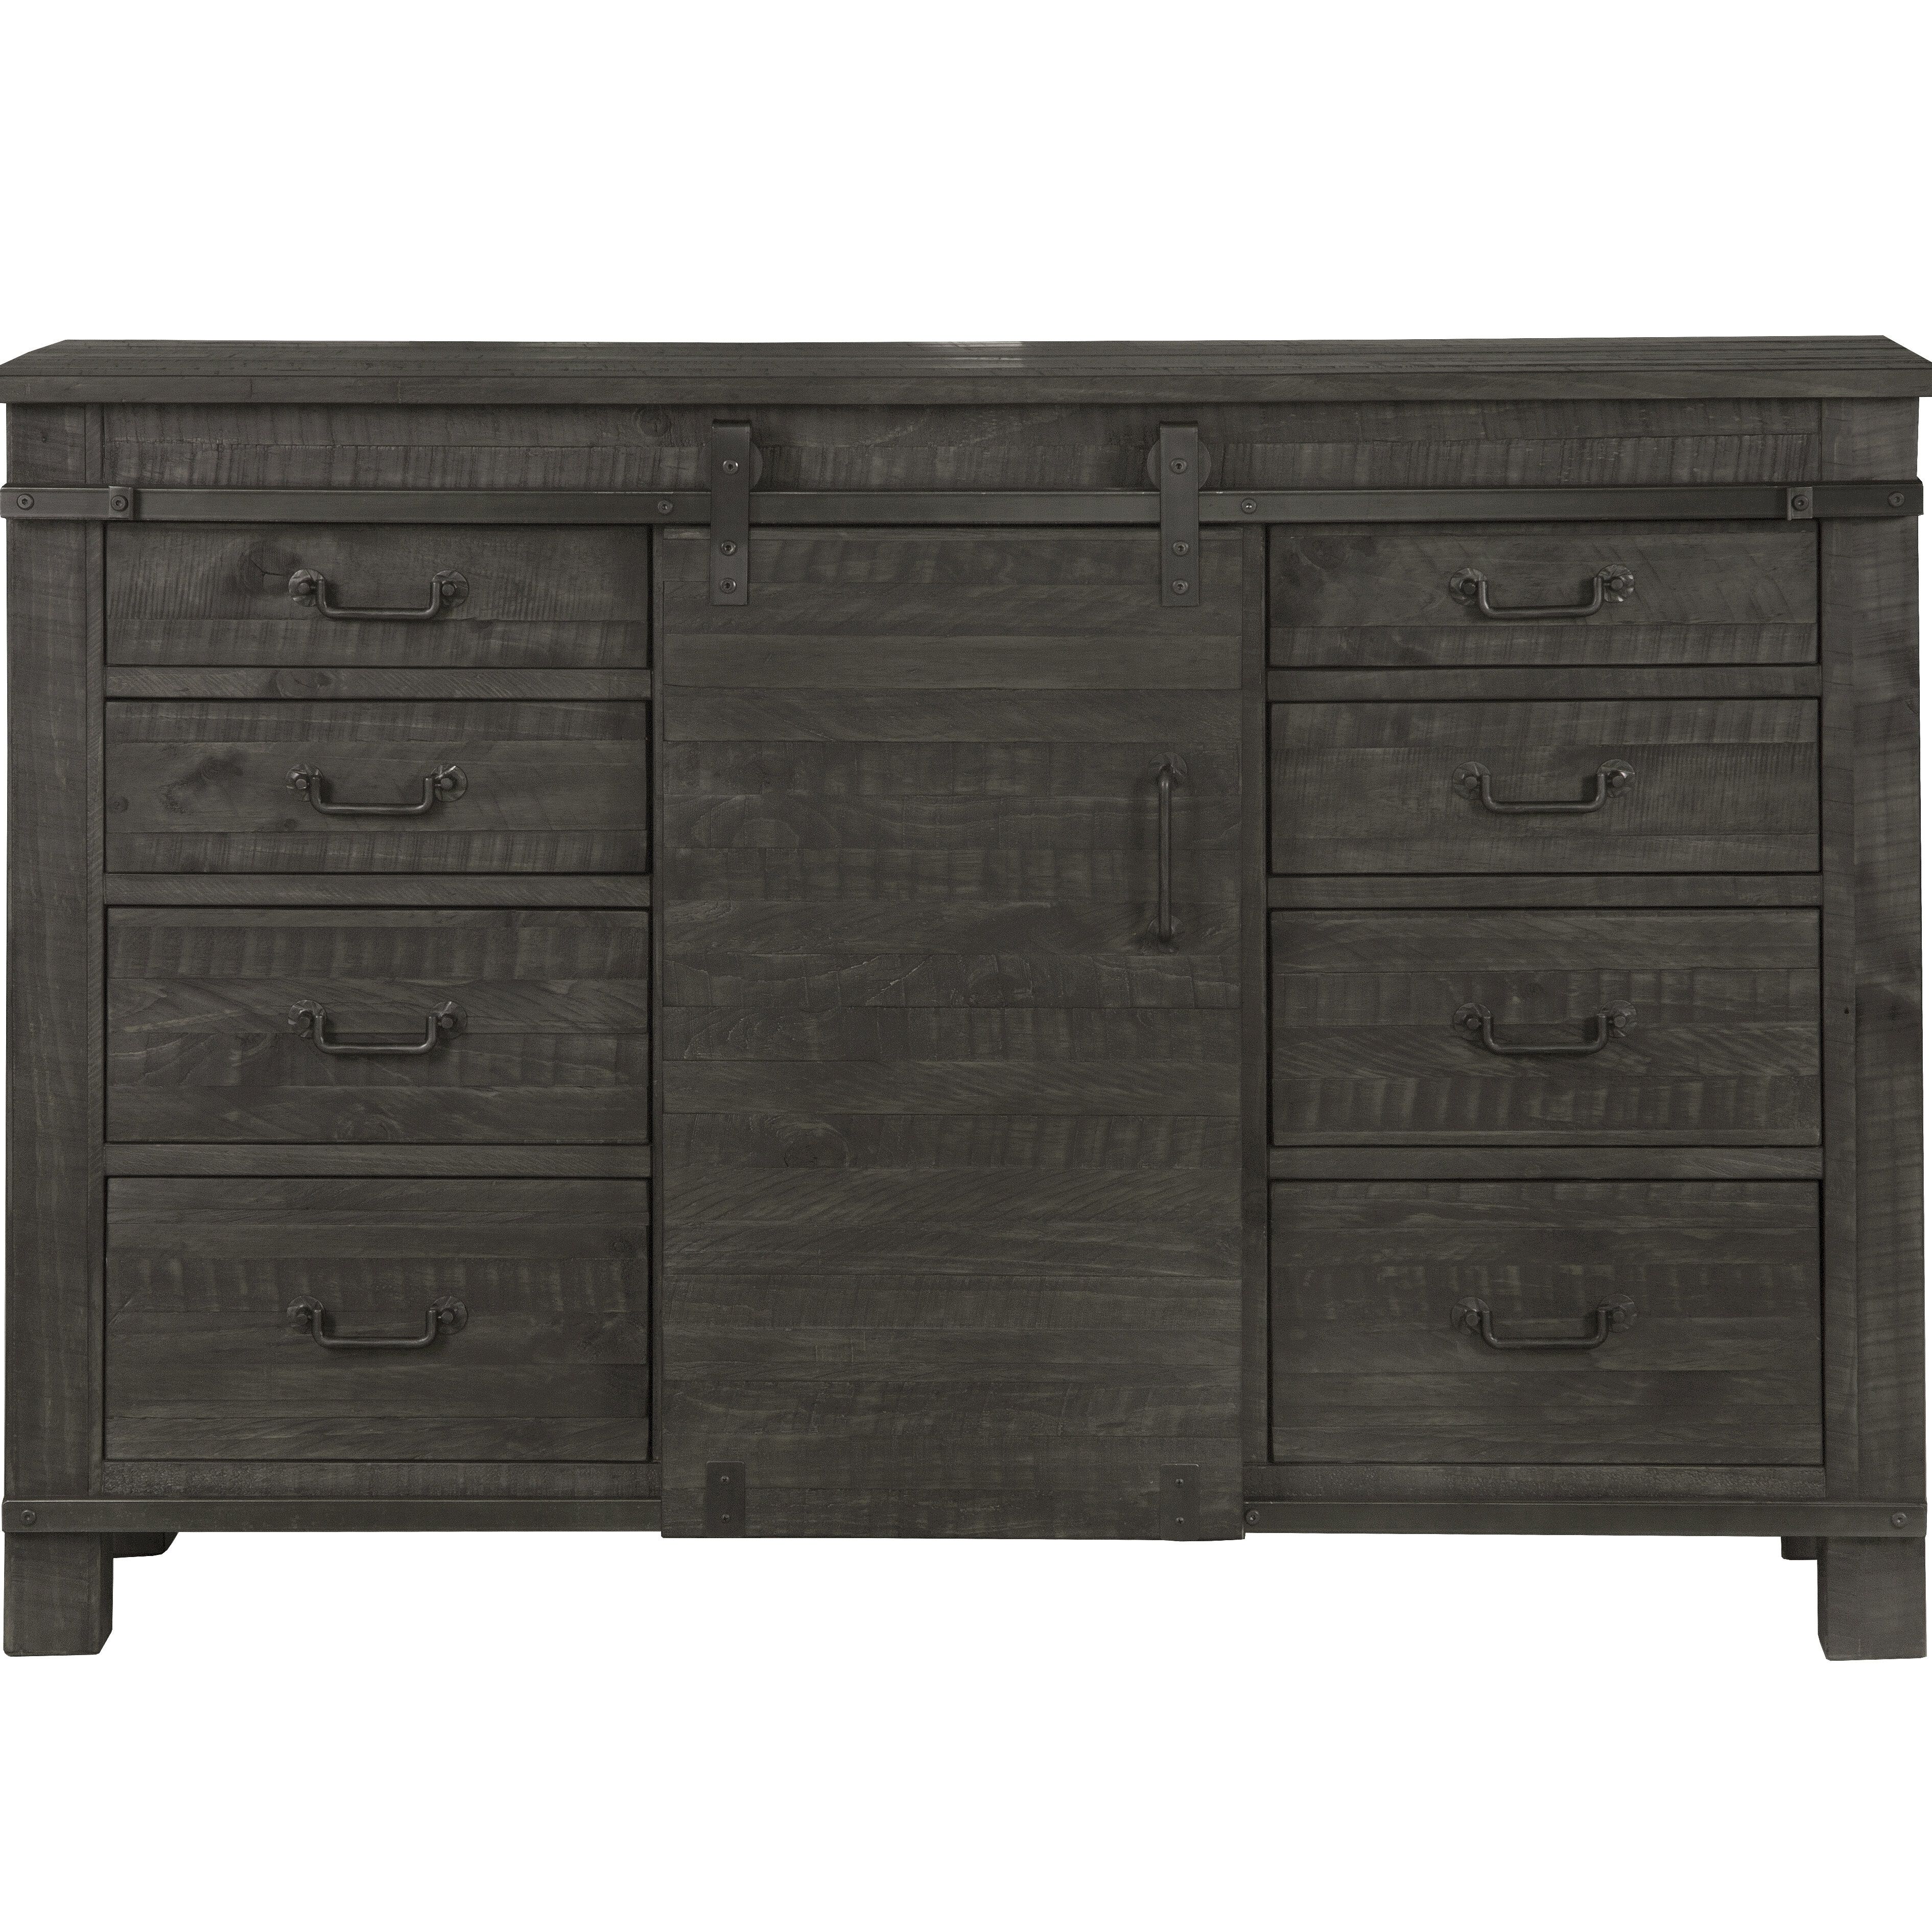 Carston Sideboard & Reviews | Joss & Main Pertaining To Wendell Sideboards (View 6 of 30)